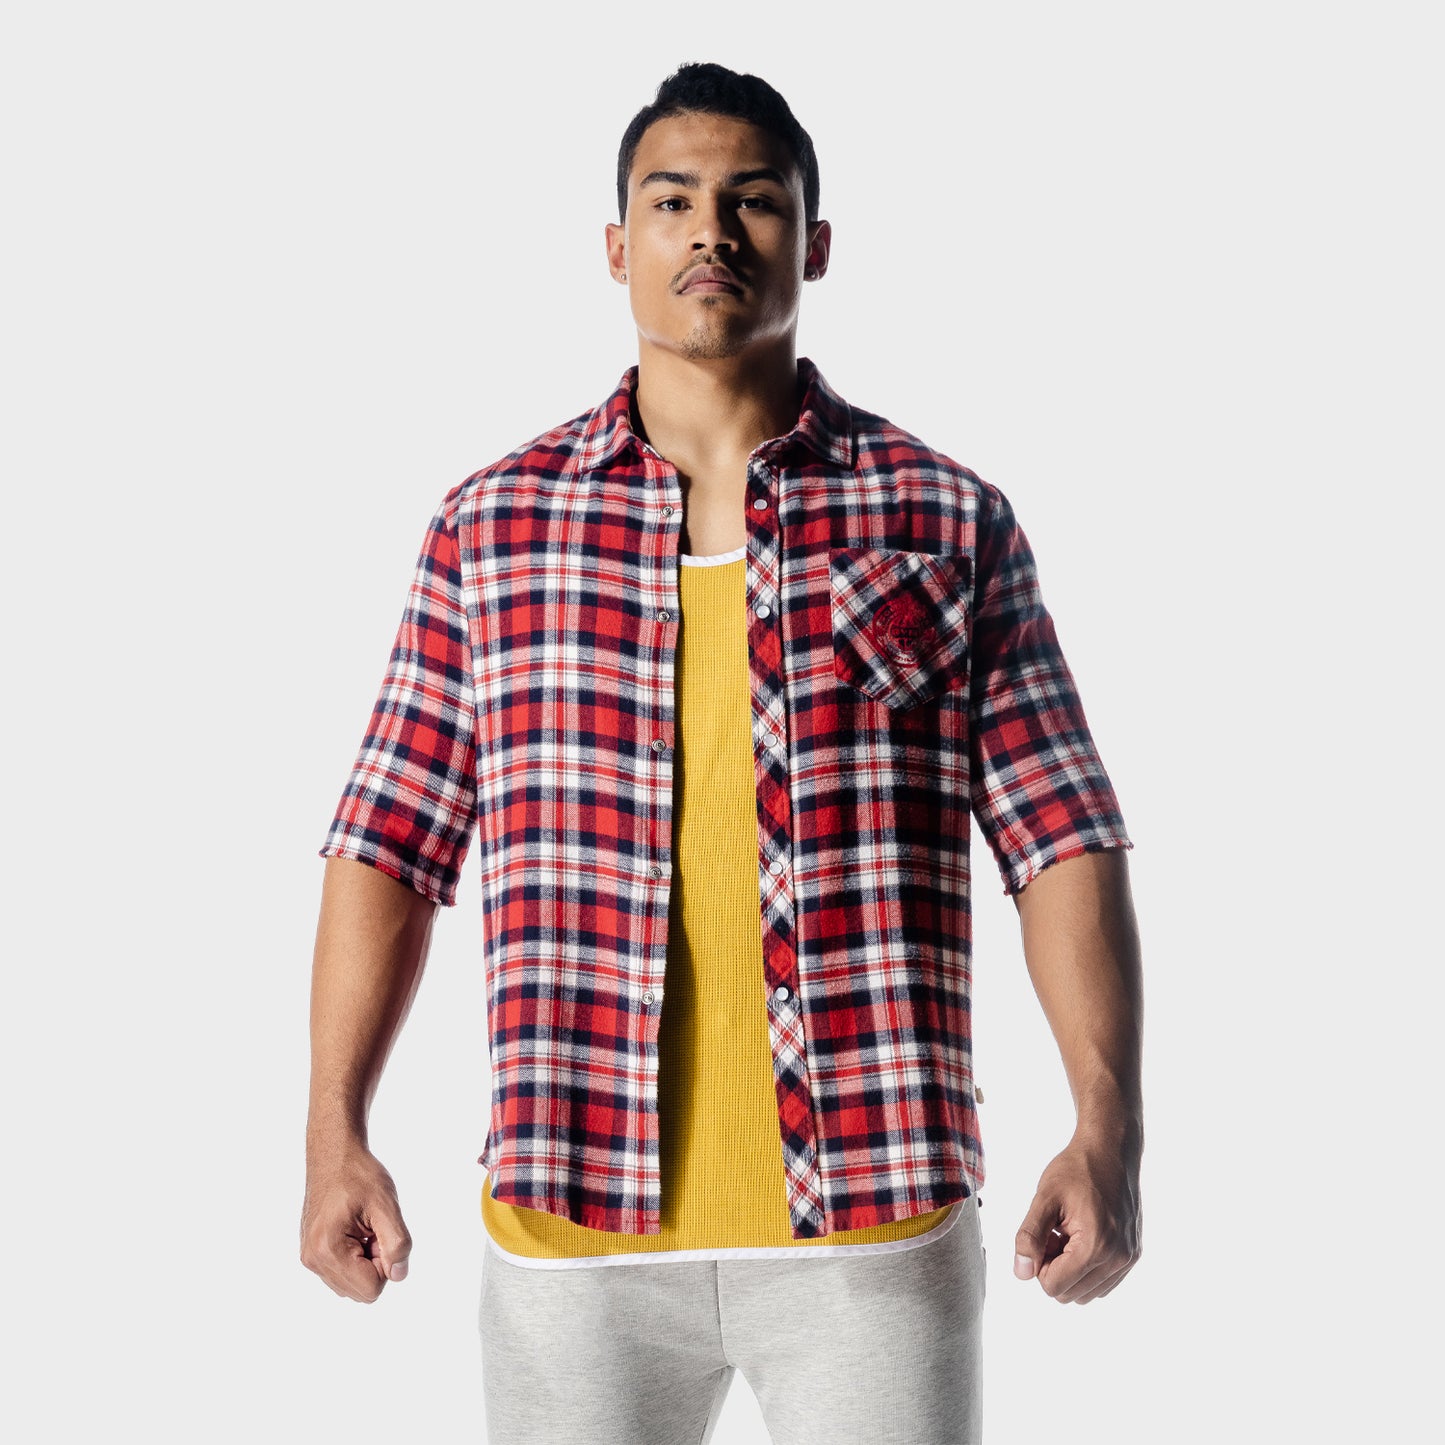 squatwolf-workout-shirts-golden-era-flannel-shirt-red-check-workout-clothes-for-men